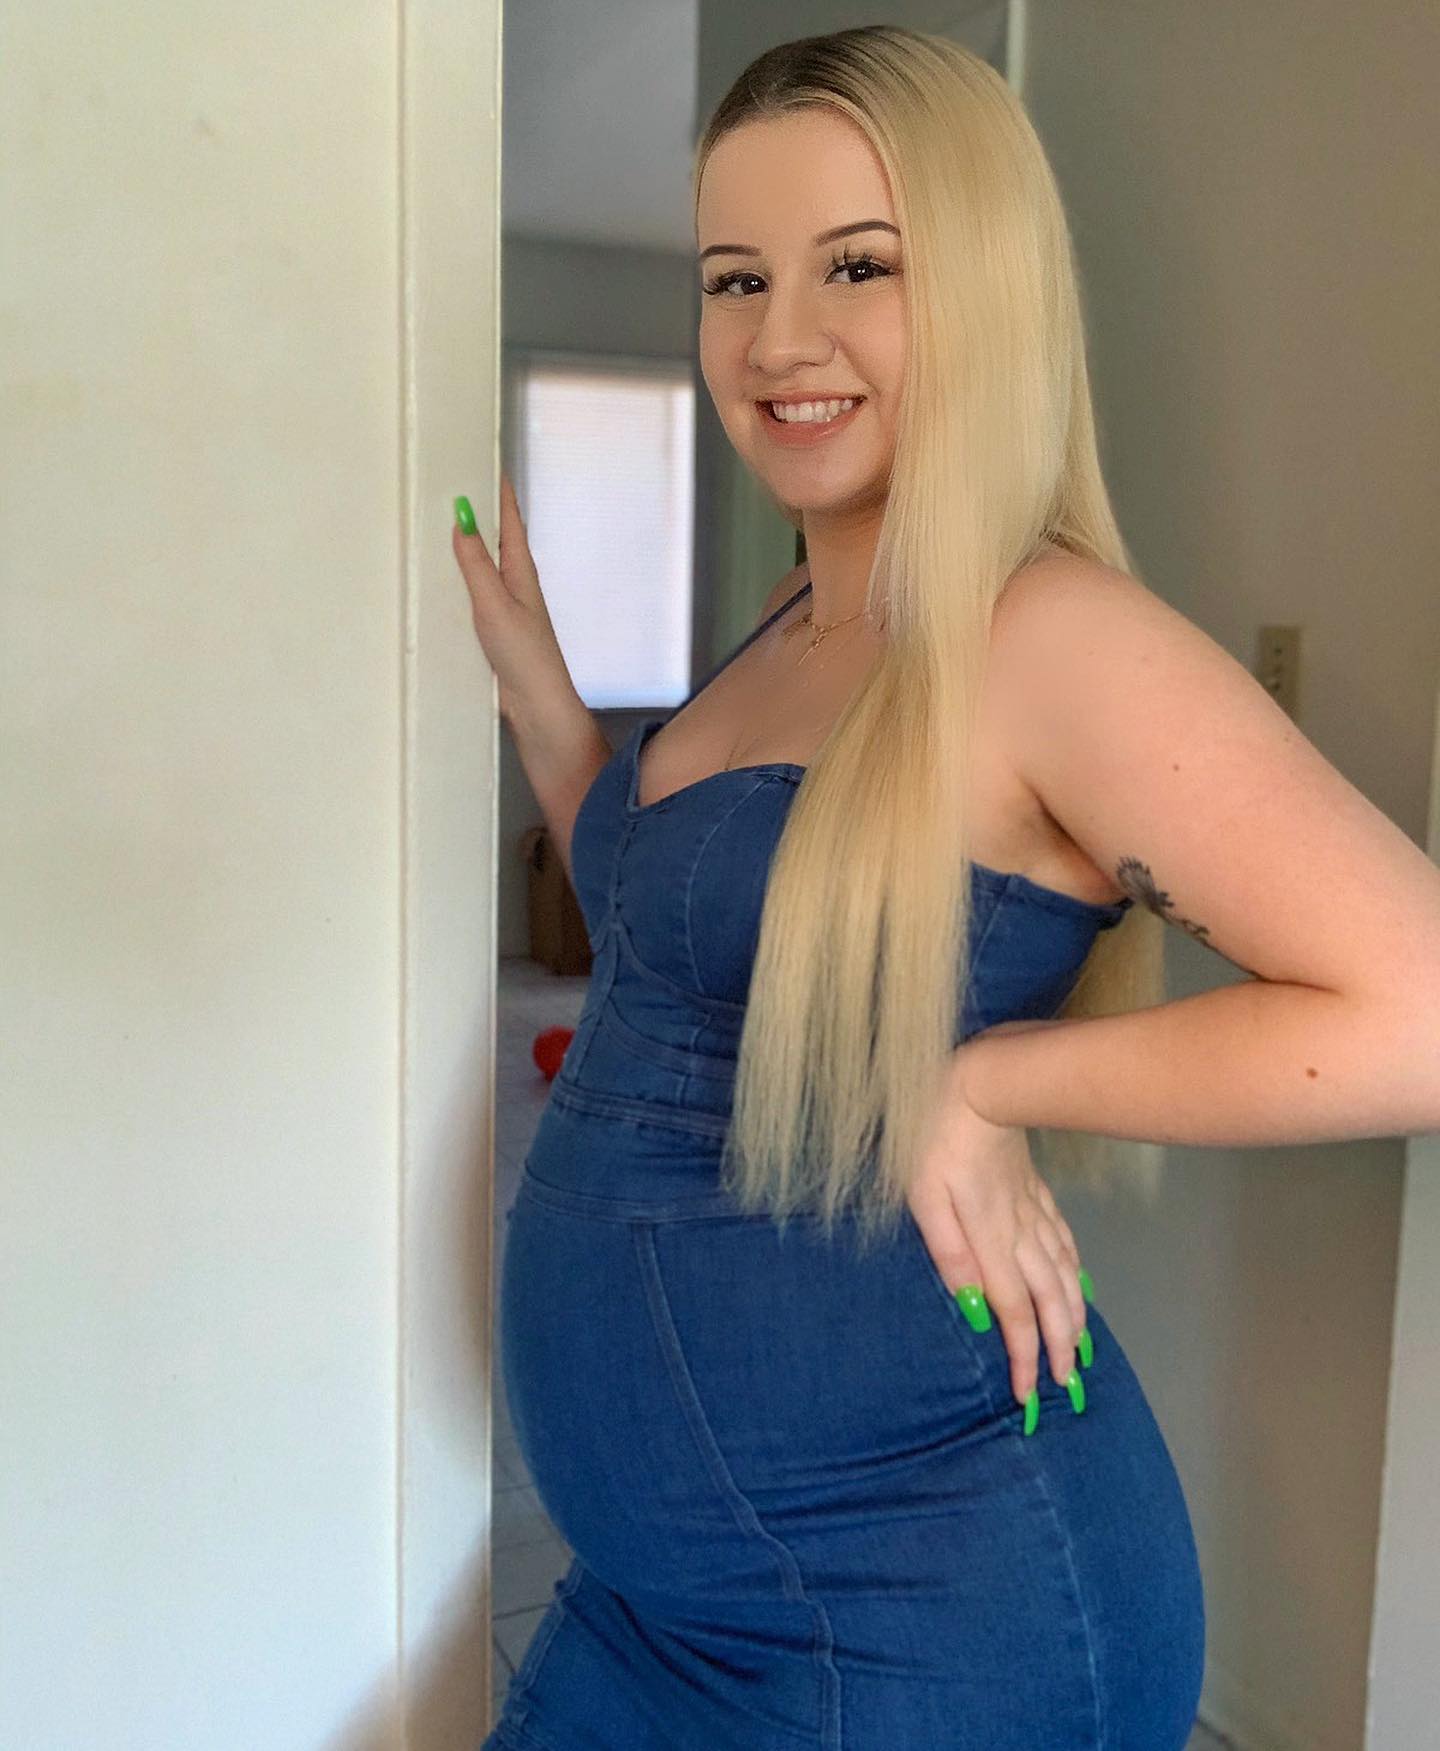 Fans were first introduced to Kayla on Young & Pregnant as she welcomed her son